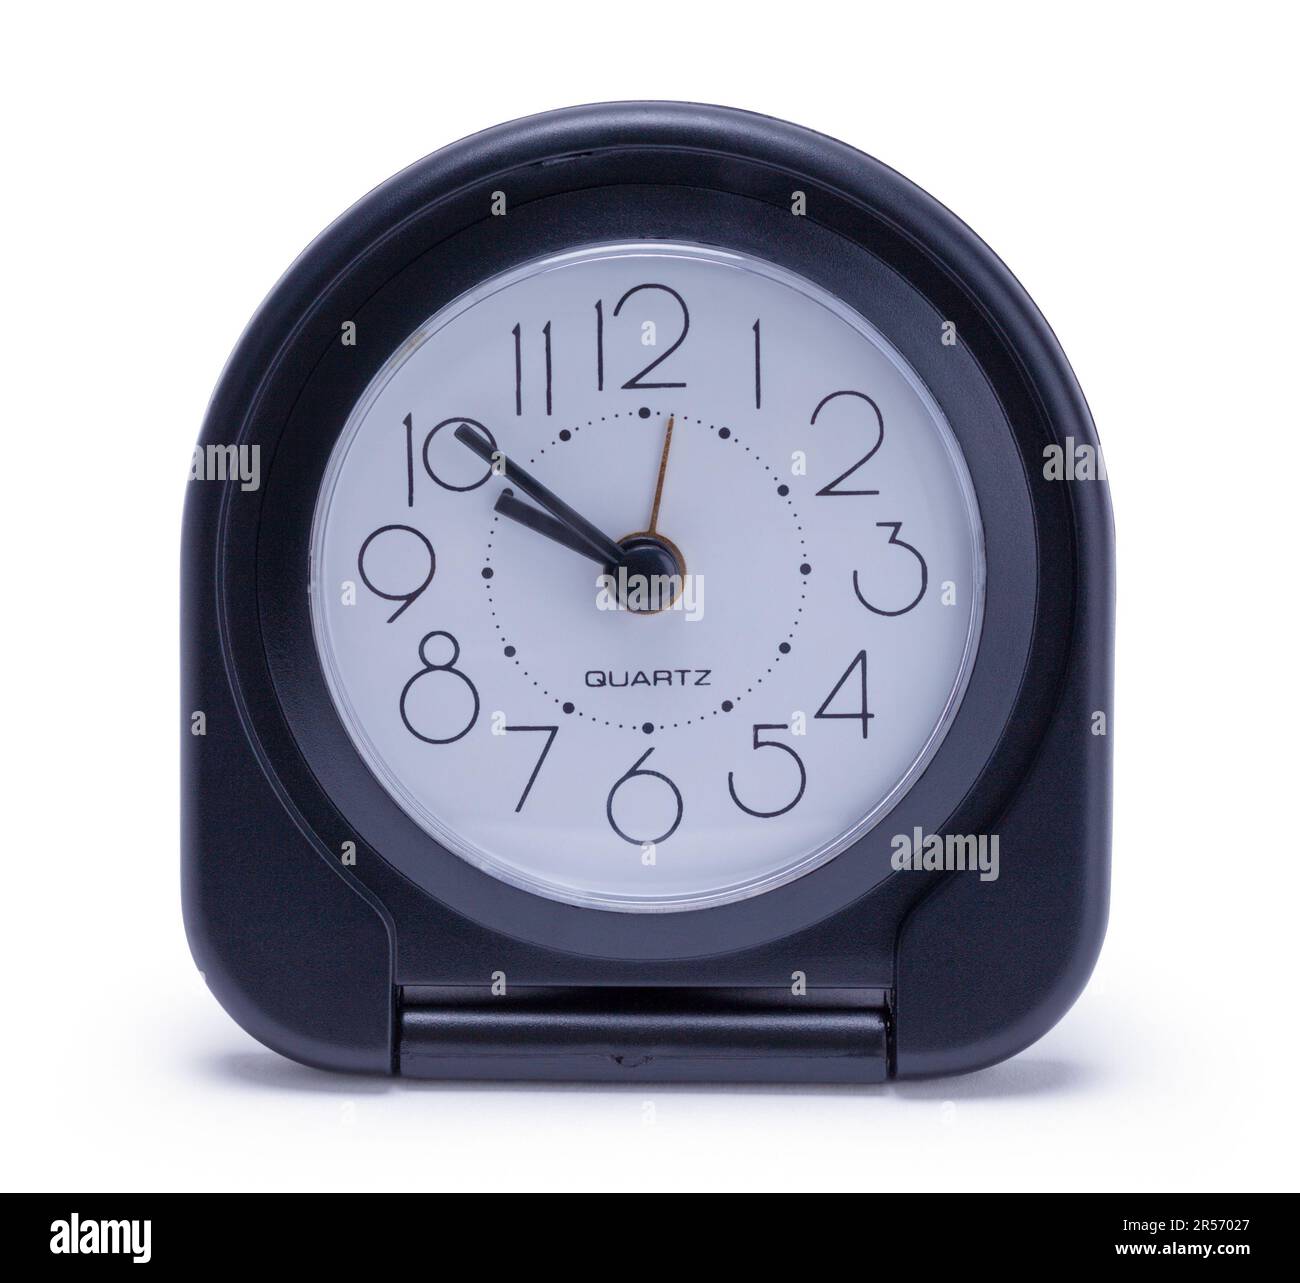 Black Travel Alarm Clock Cut Out on White. Stock Photo